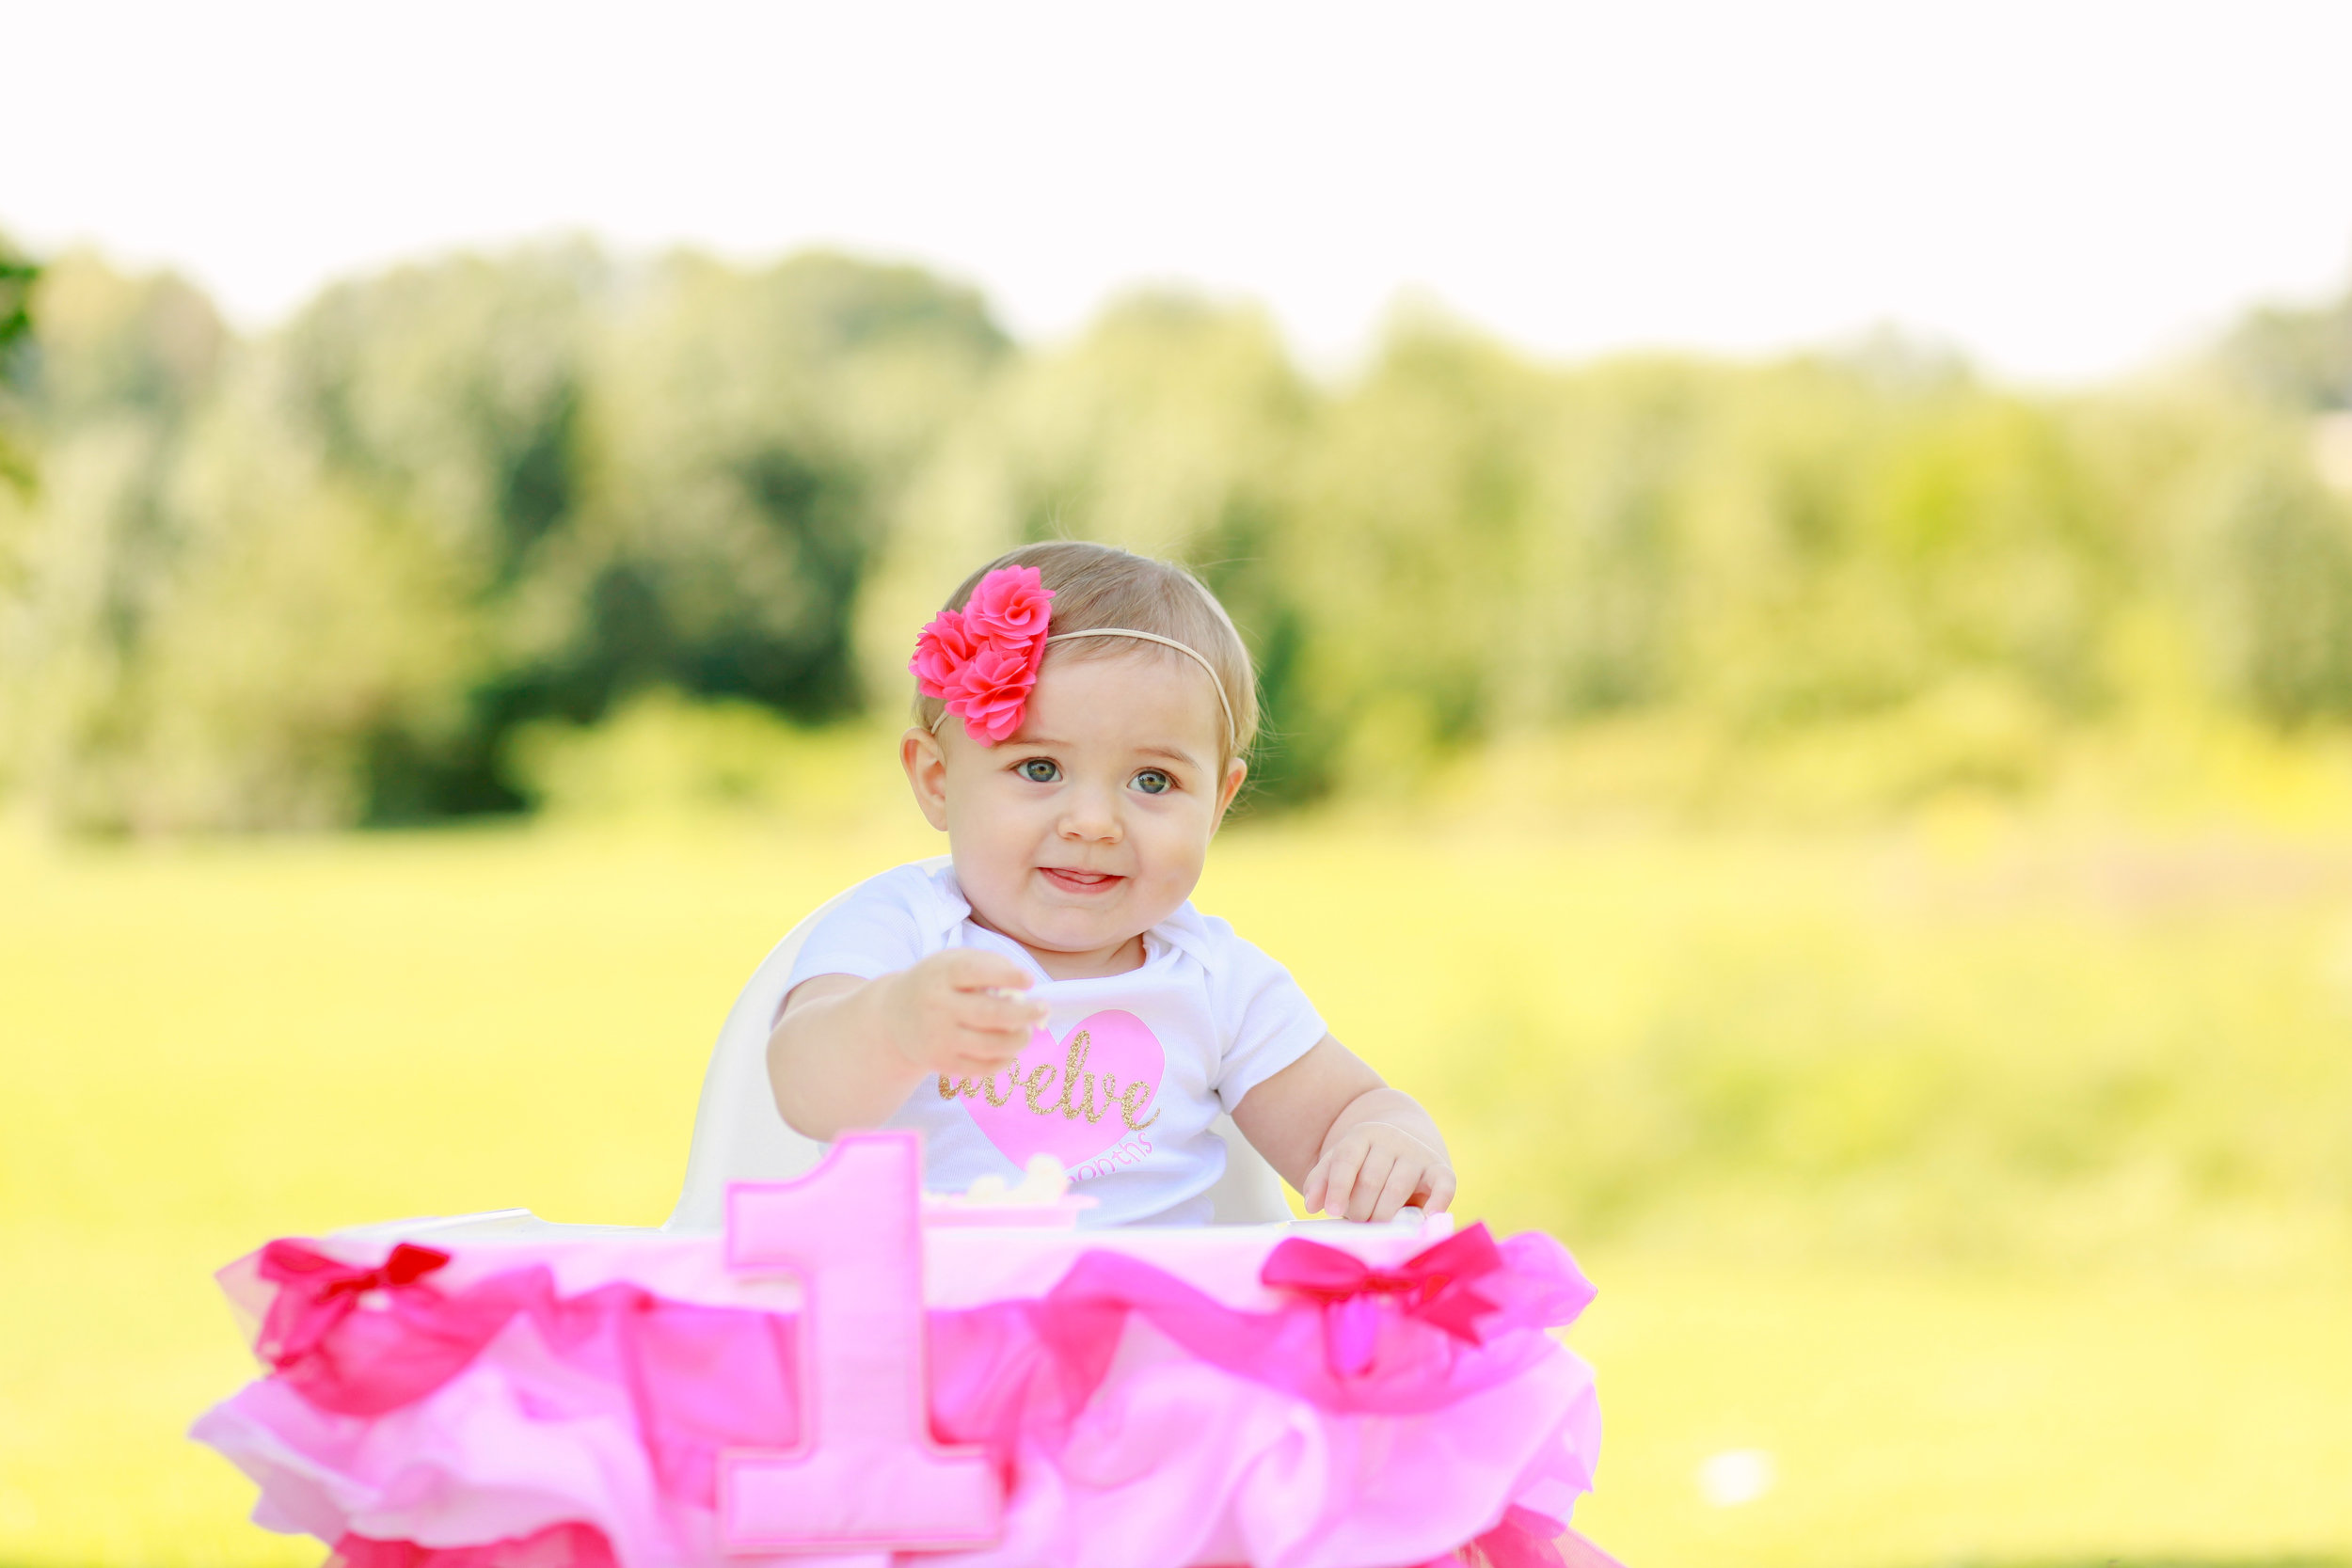 One Year Photo Session | MALLORIE OWENS